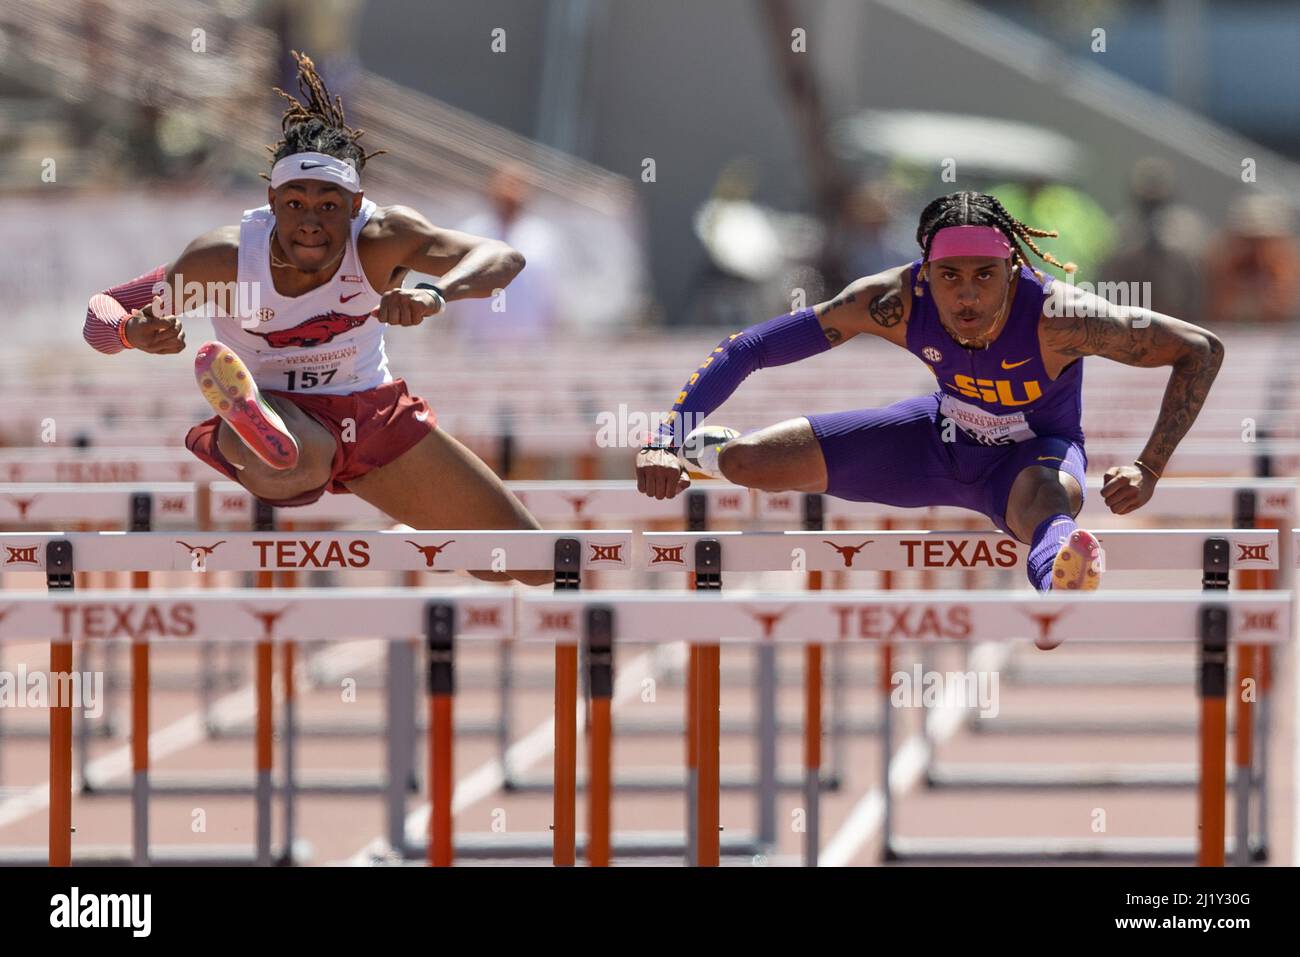 Eric Edwards Jr. of LSU wins the 110 hurdles during the 94th Clyde